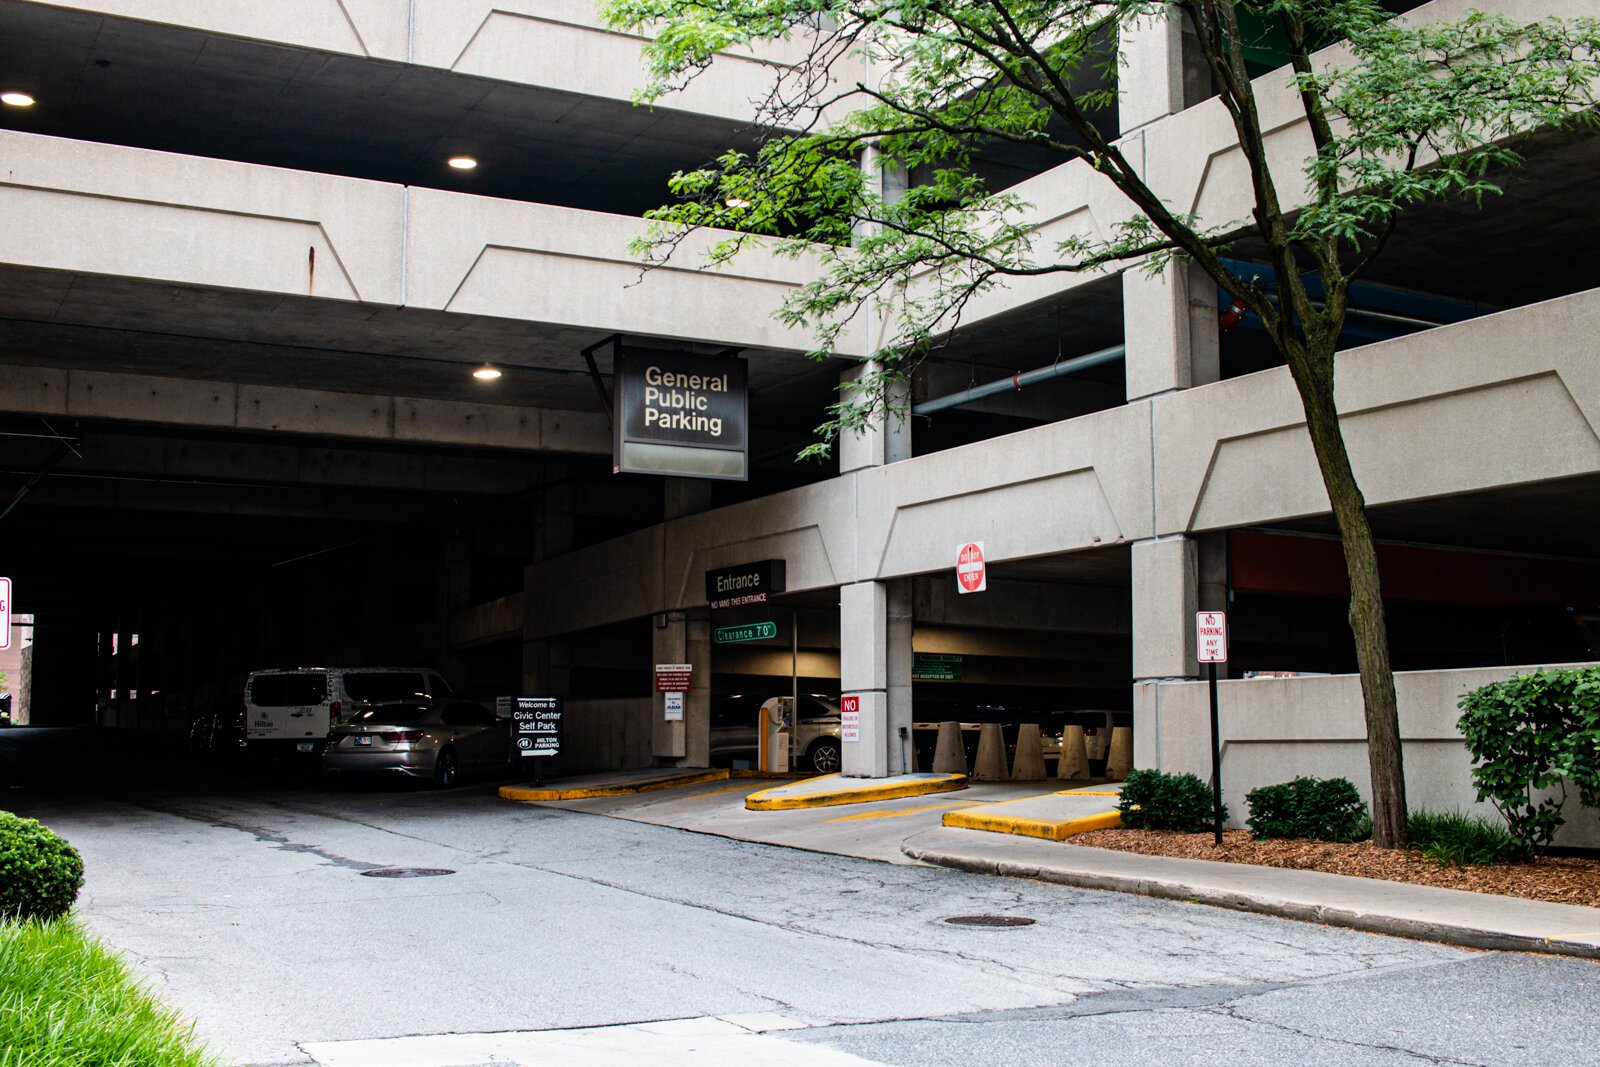 Parking garages can be a space-efficient solution to parking Downtown.